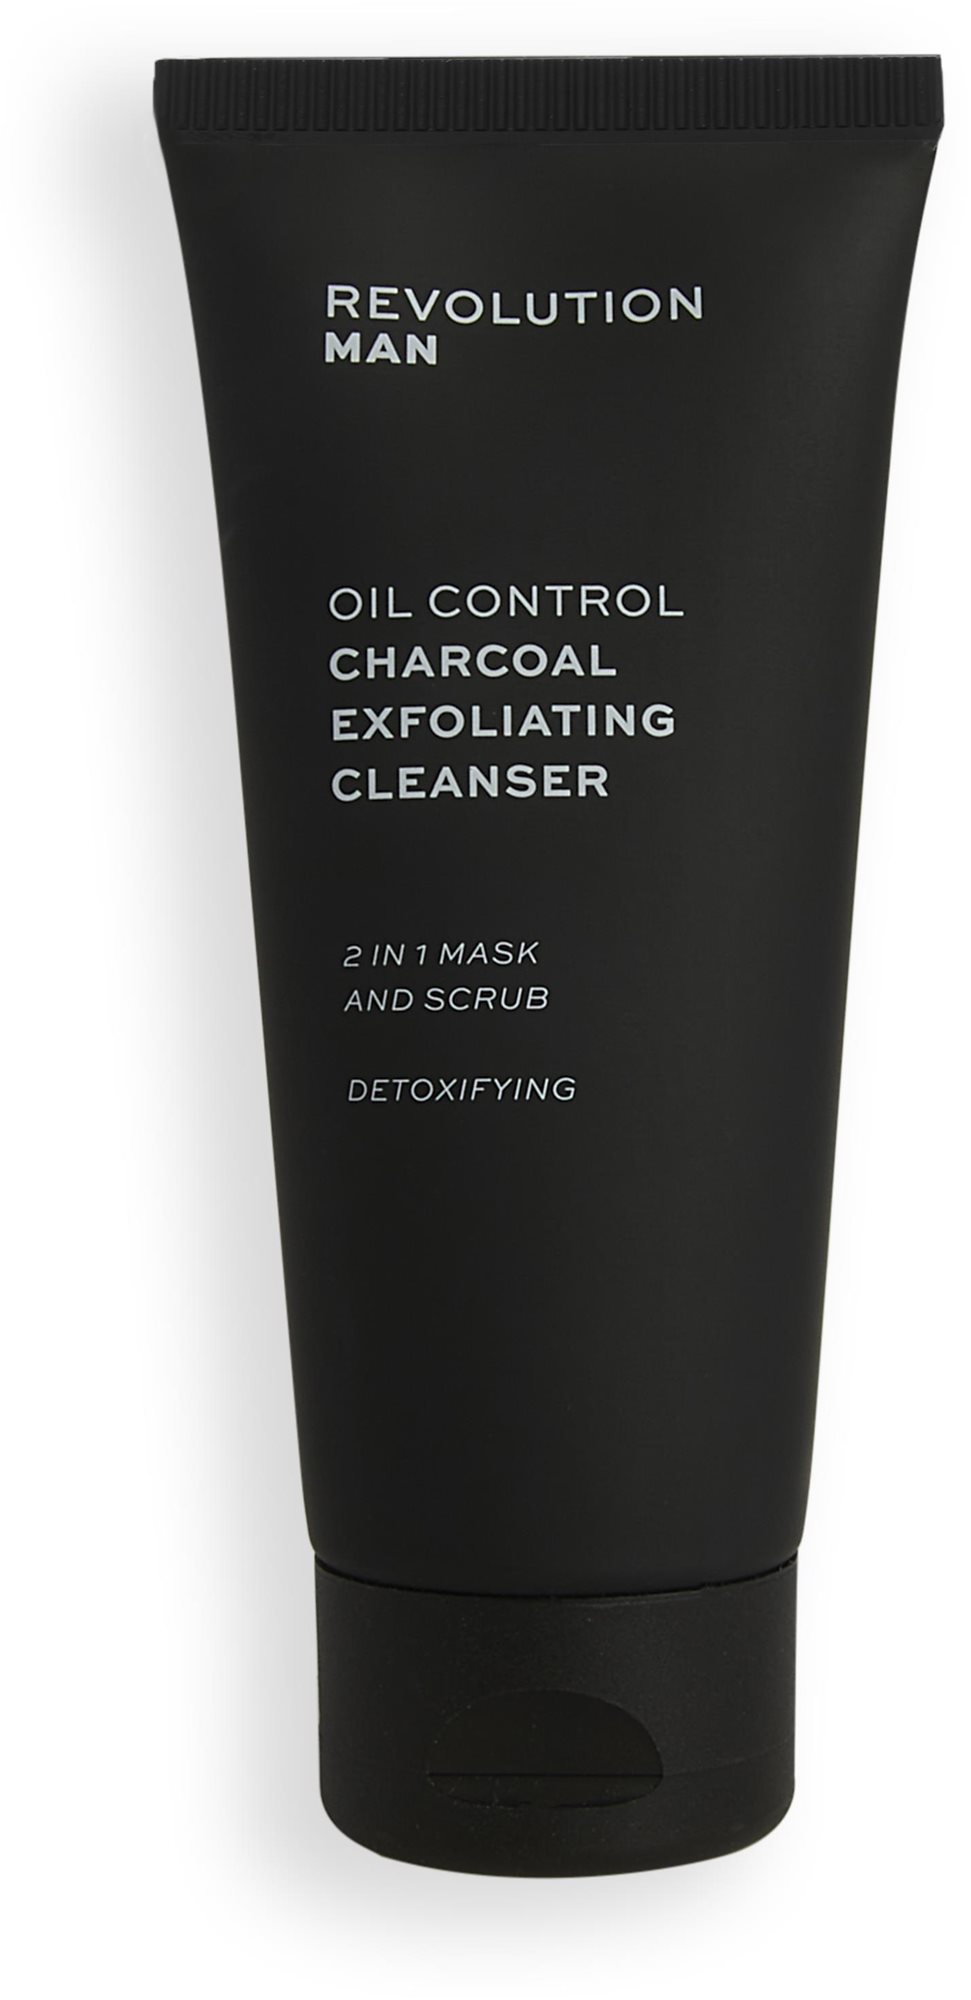 REVOLUTION MAN Charcoal Exfoliating Cleanser 100 ml